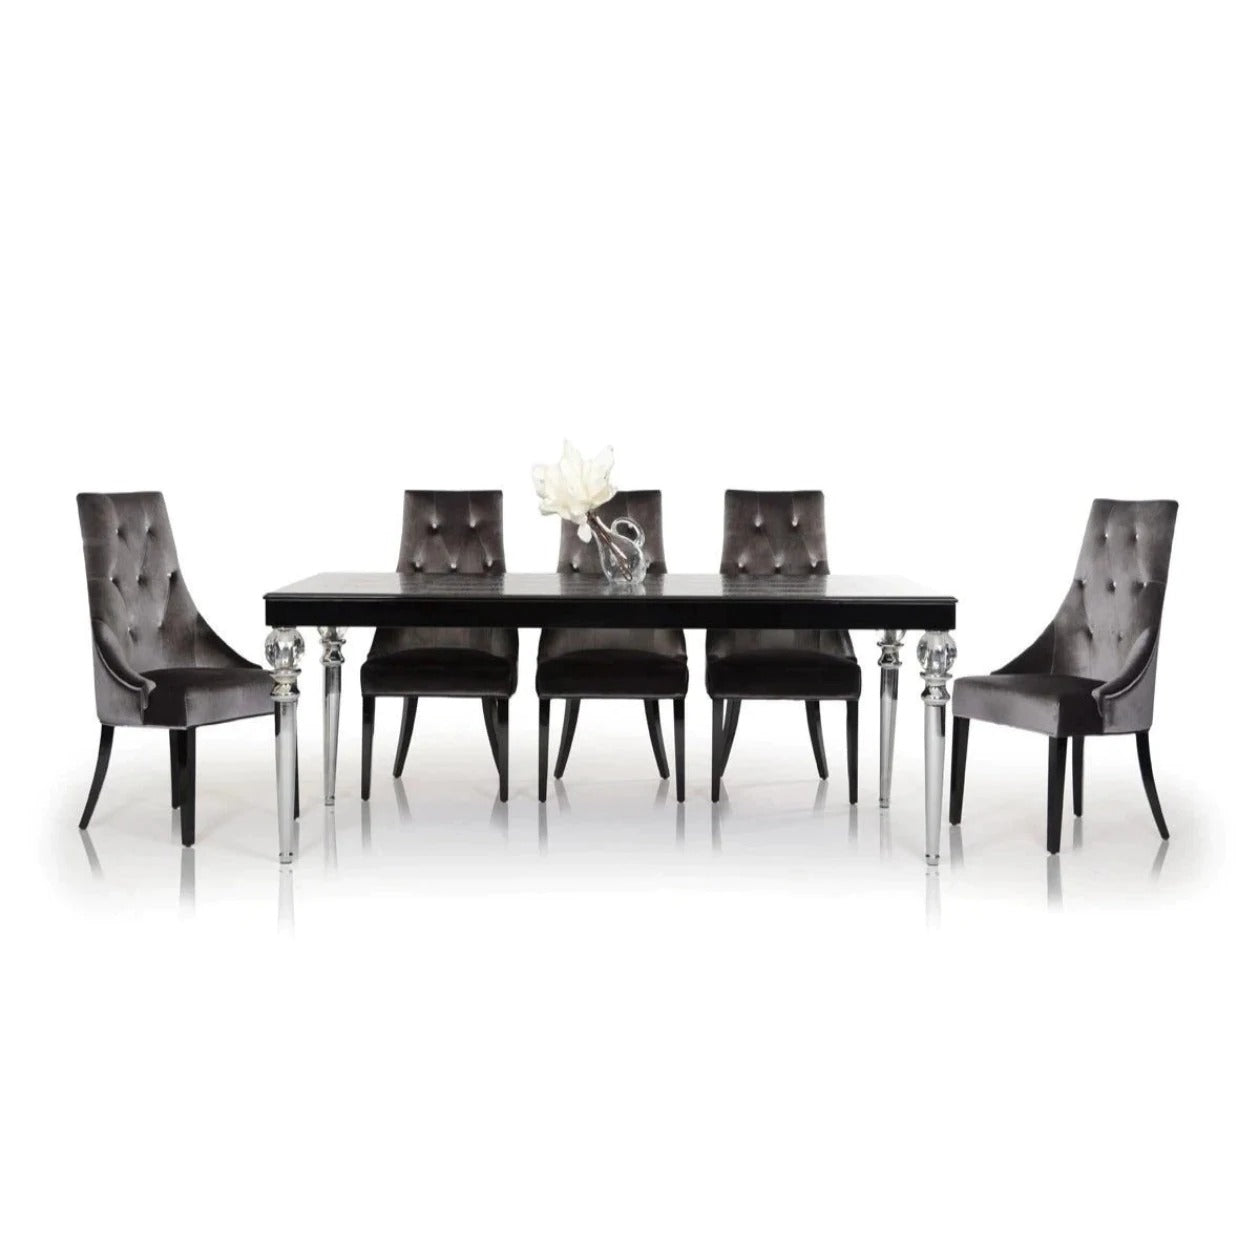 Dining Table Design, Modern Dining Table Design, Wooden Dining Table Design